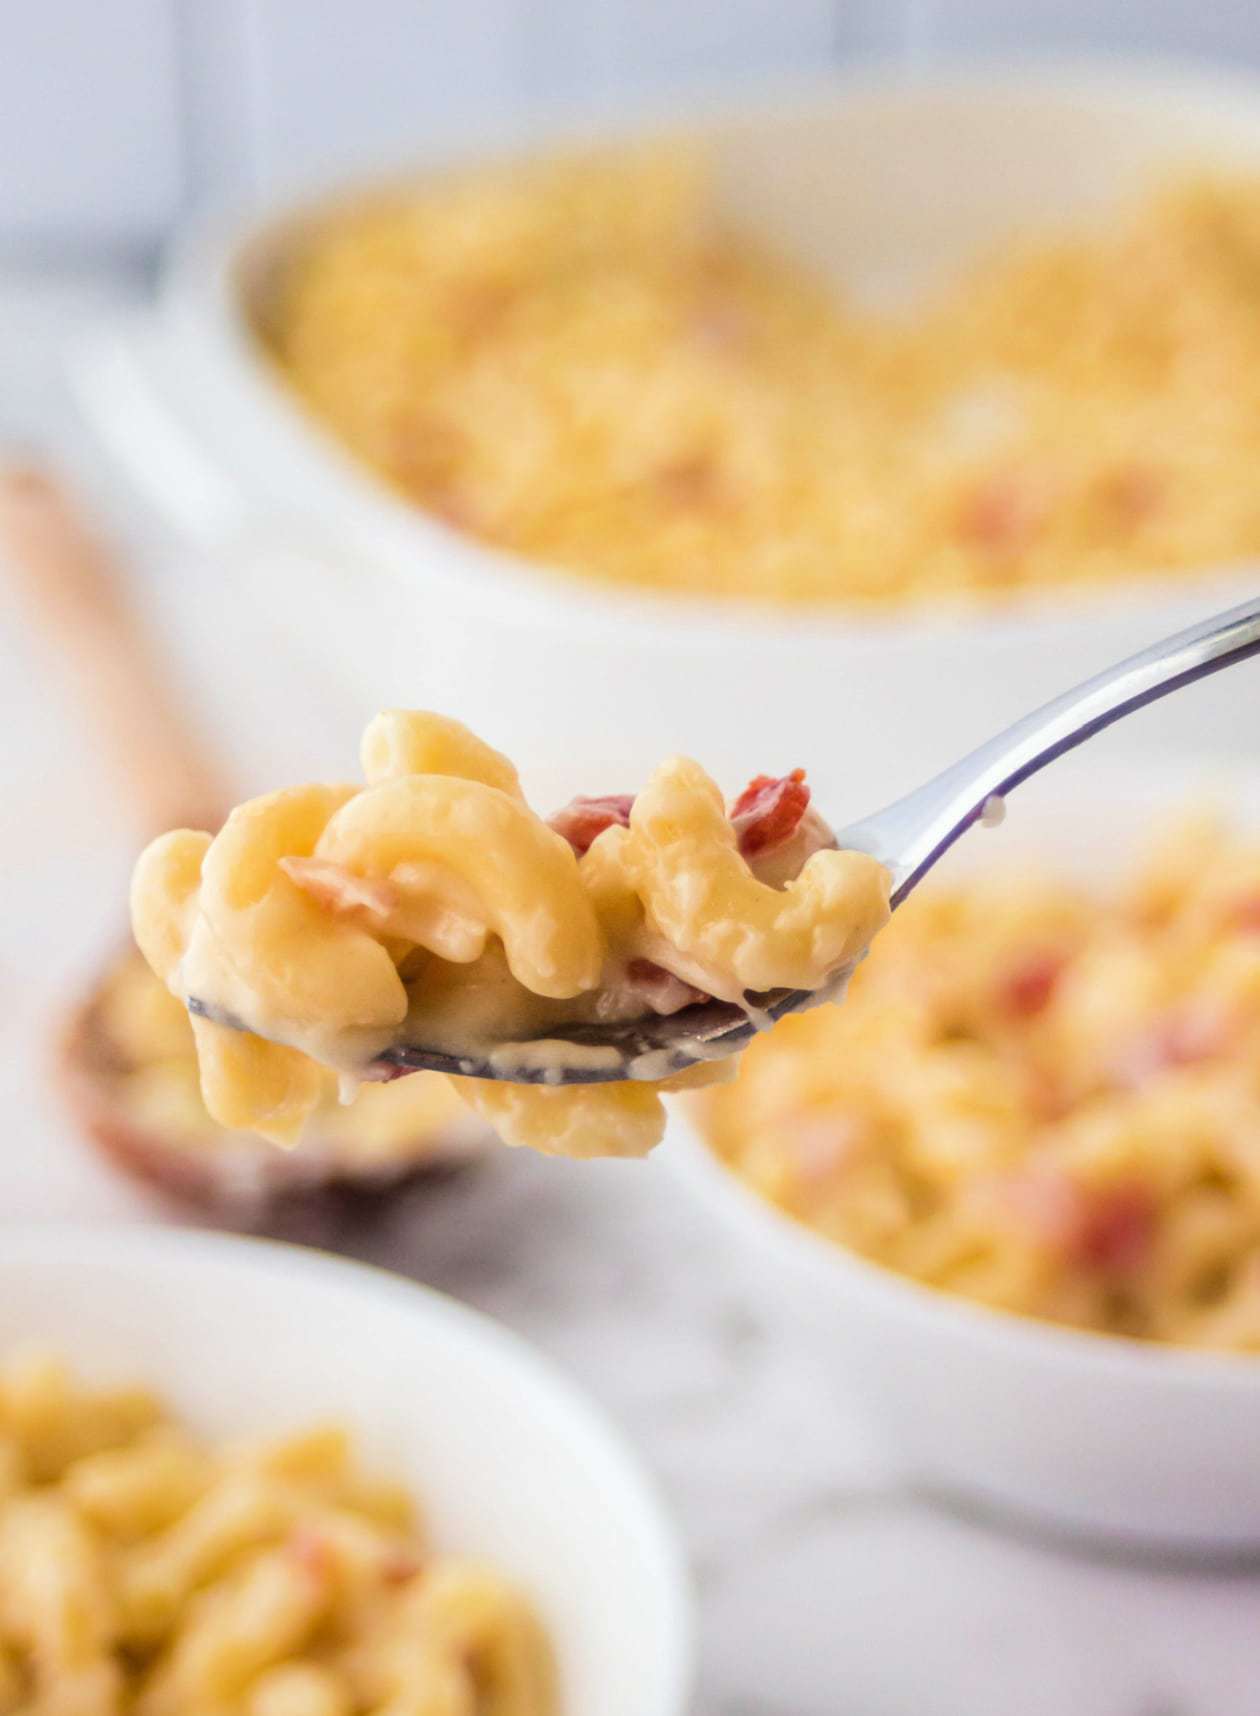 A spoon full of mac n cheese and bacon pieces.